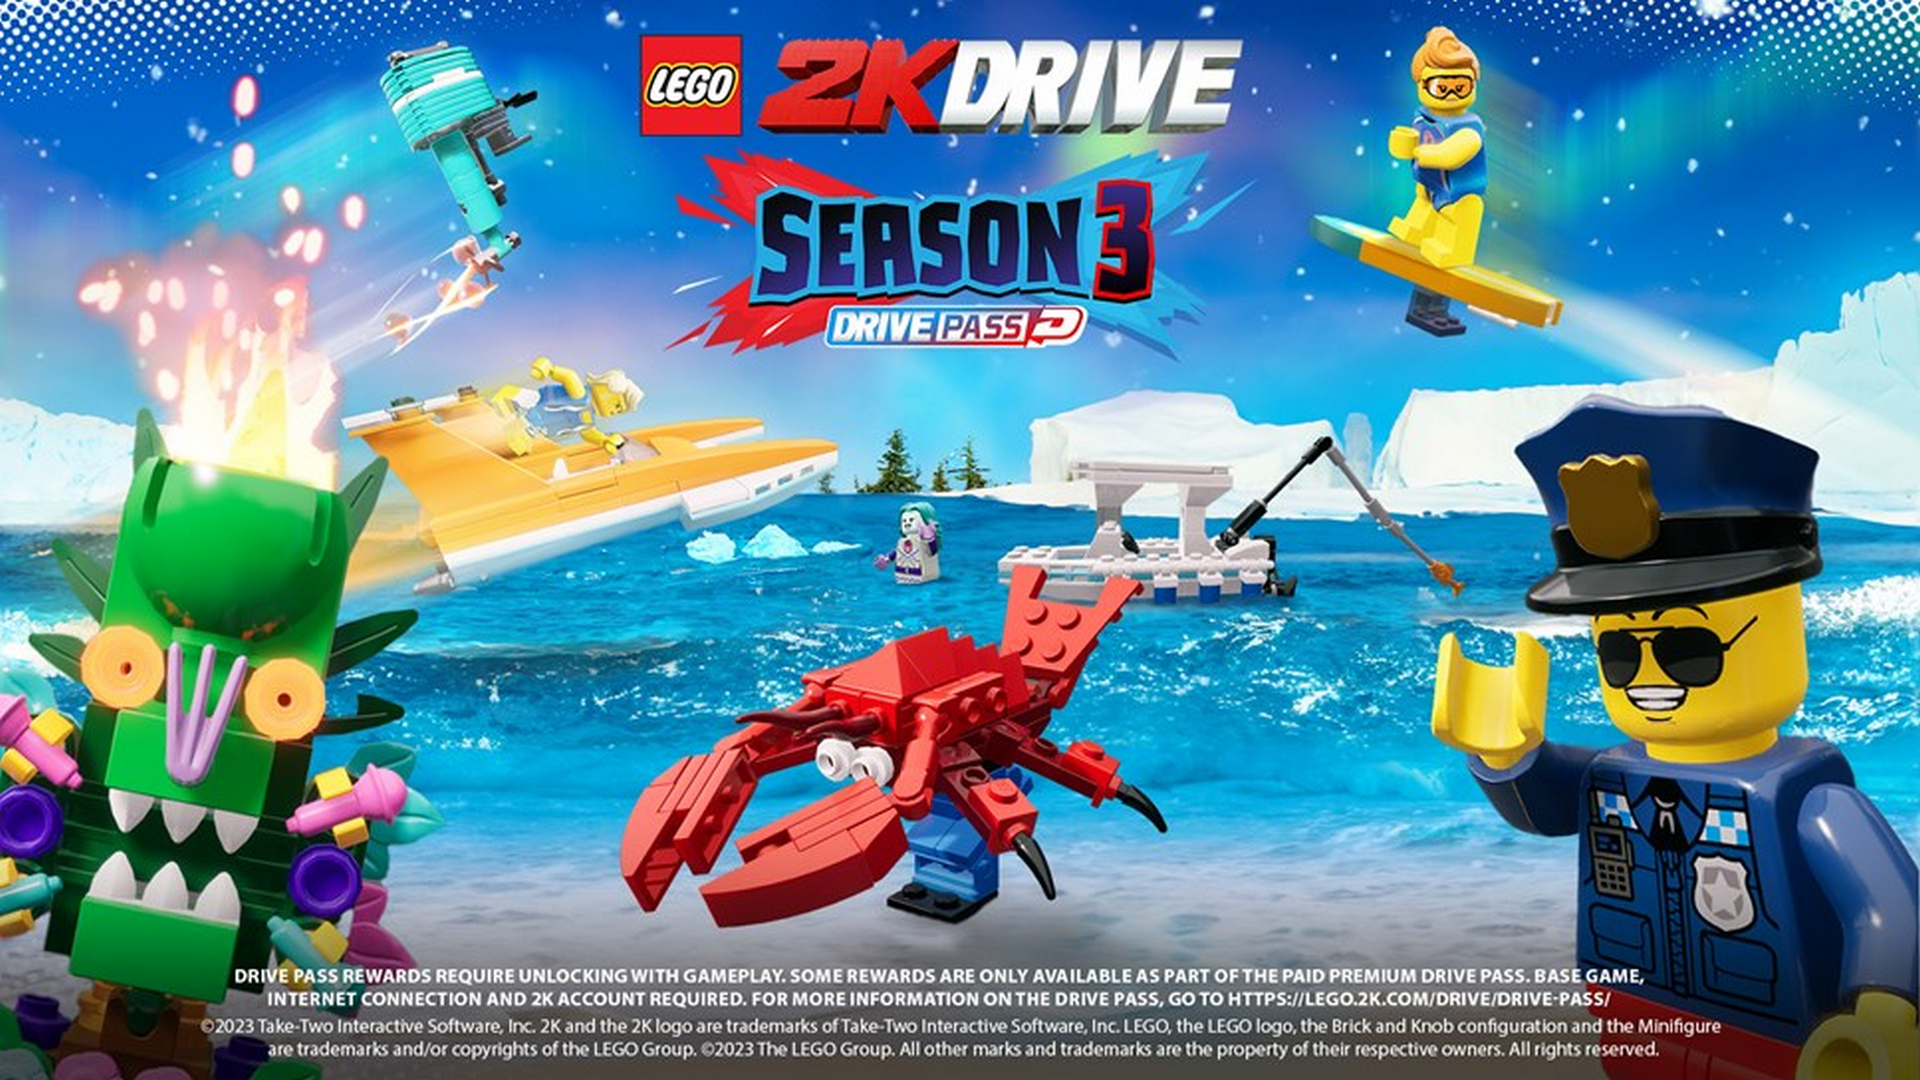 Drive Pass Season 3 For LEGO 2K Drive Arriving Wednesday